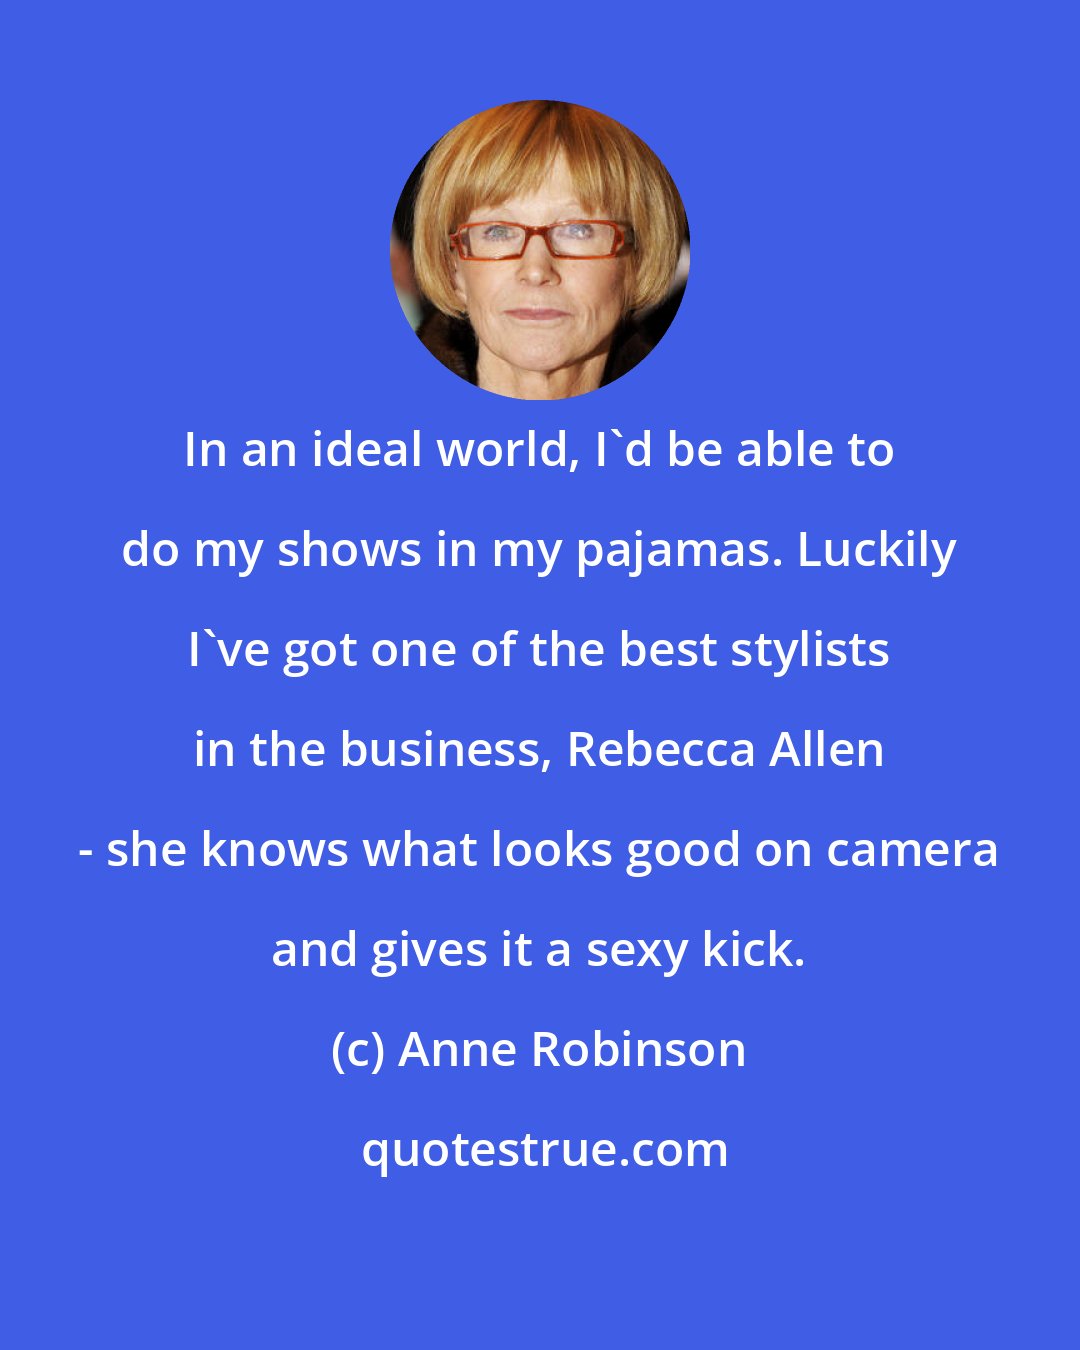 Anne Robinson: In an ideal world, I'd be able to do my shows in my pajamas. Luckily I've got one of the best stylists in the business, Rebecca Allen - she knows what looks good on camera and gives it a sexy kick.